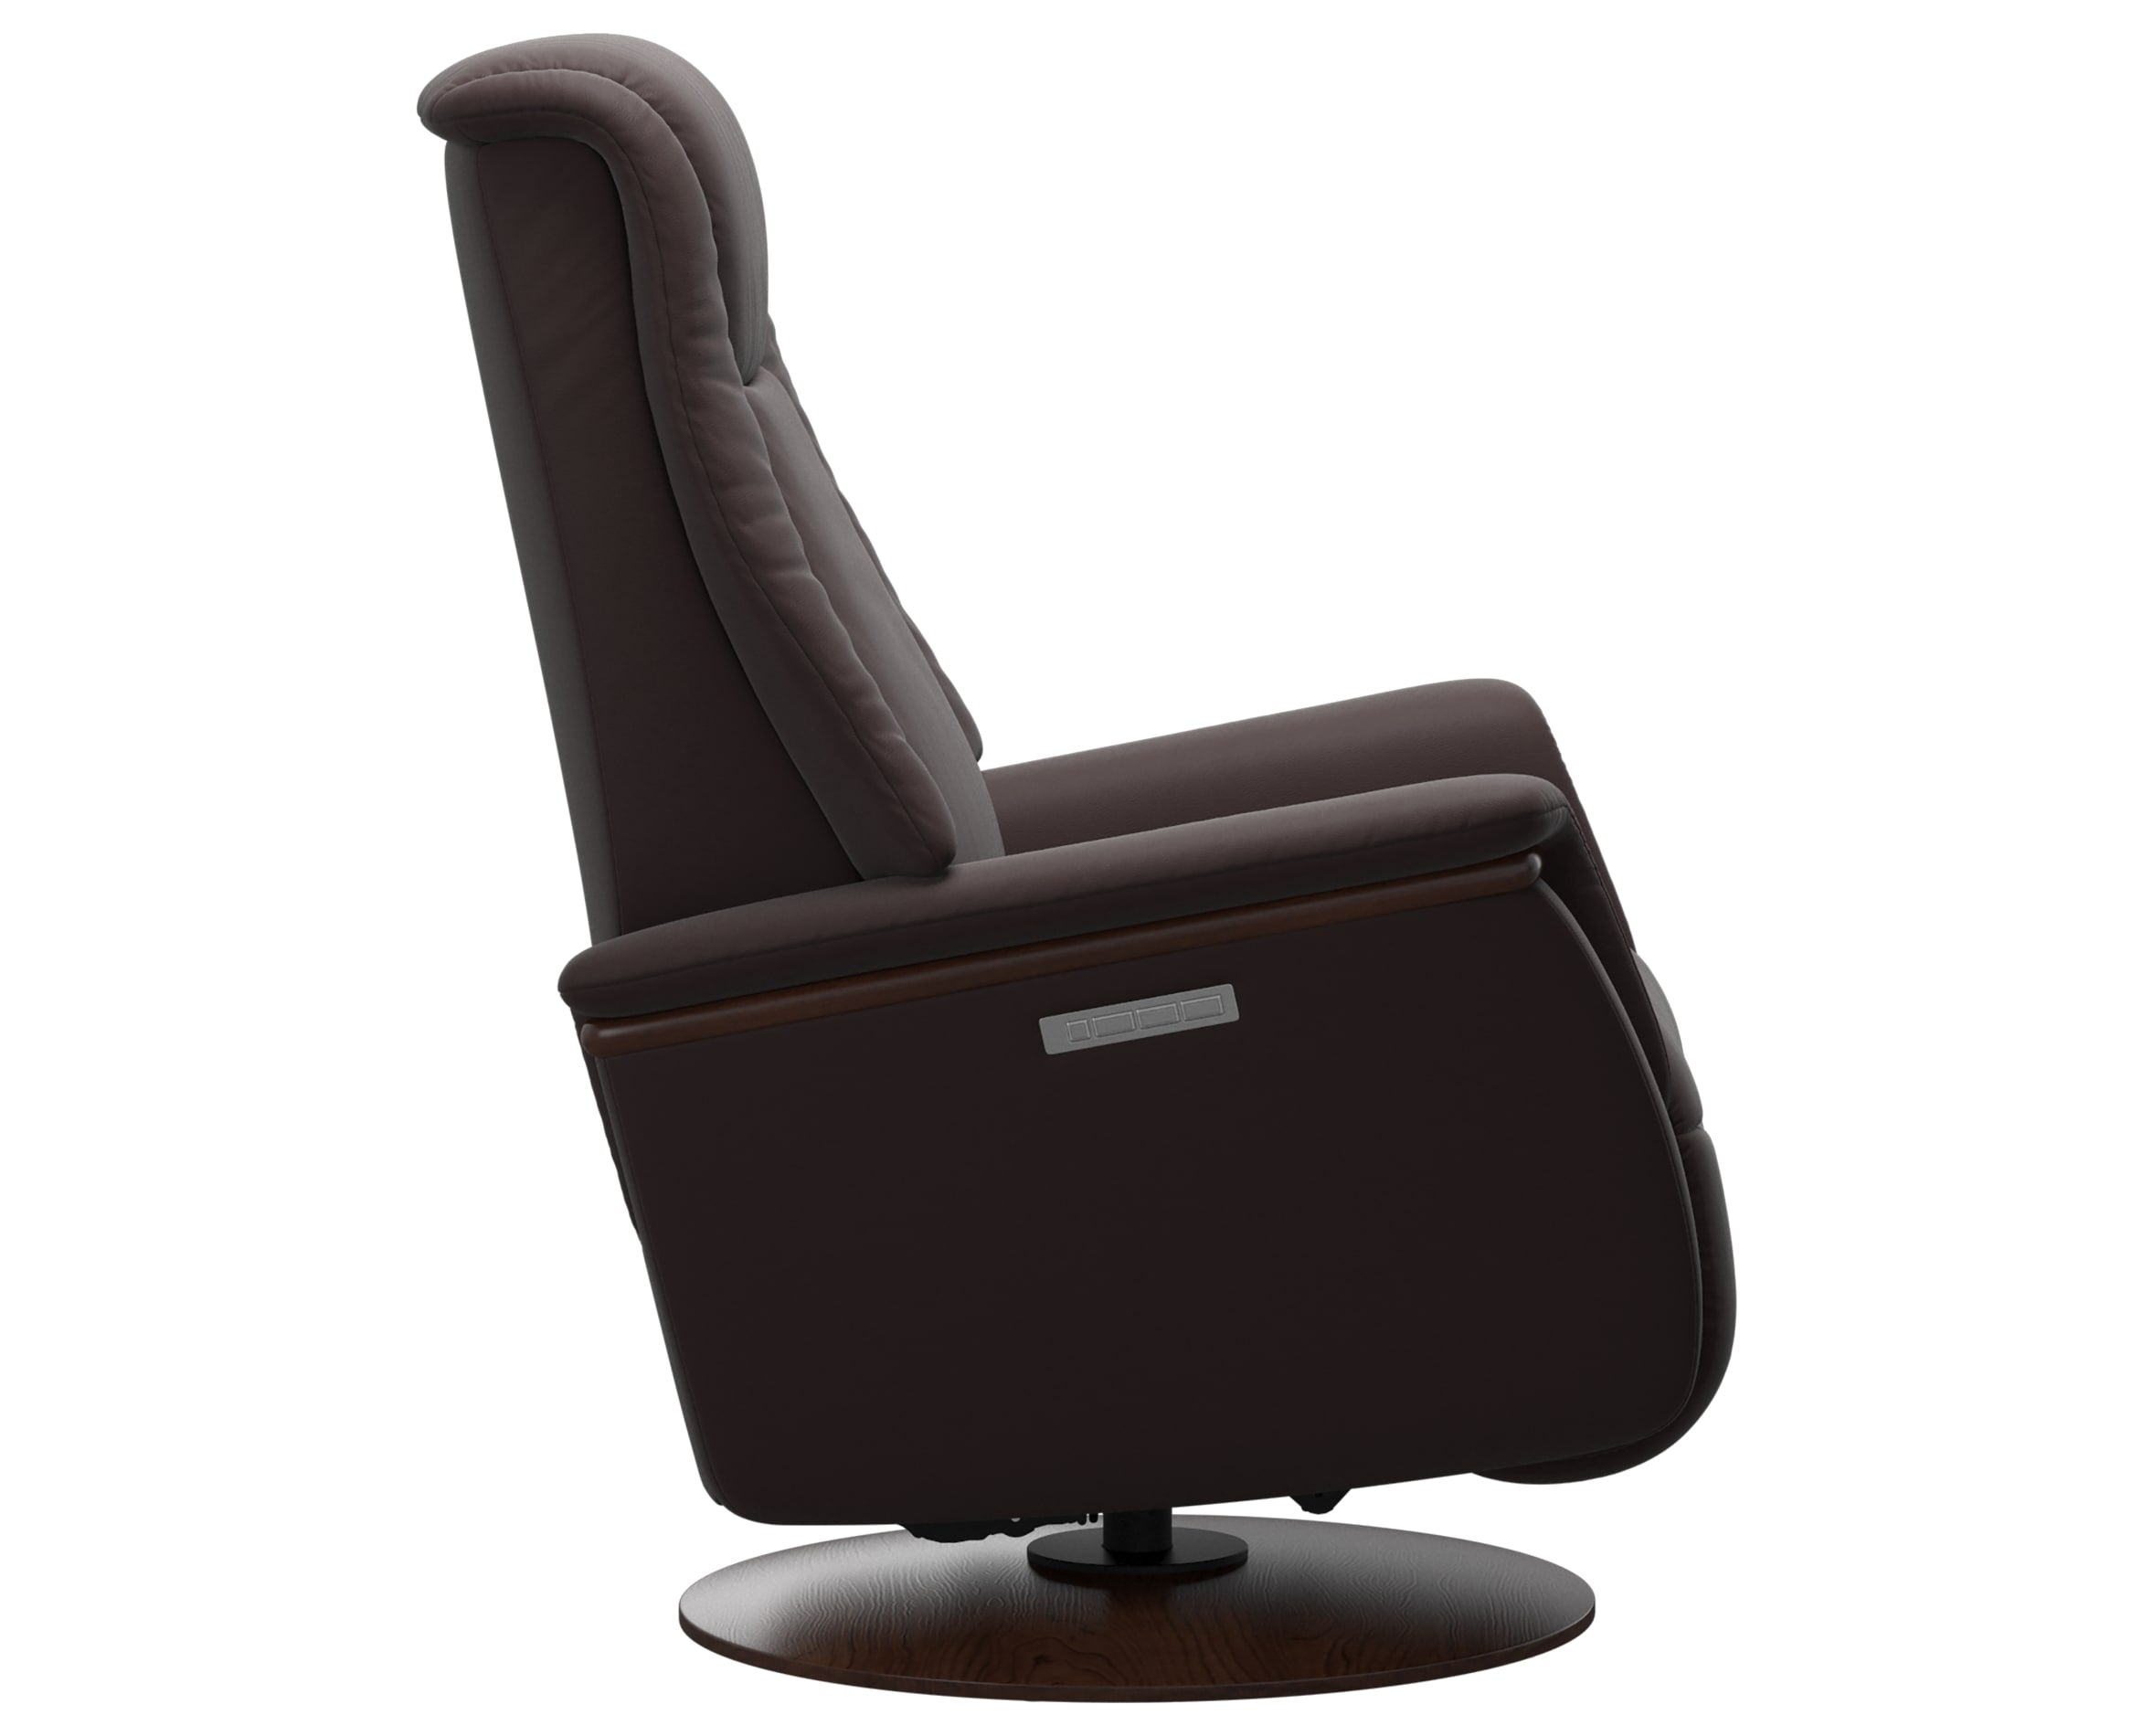 Paloma Leather Chocolate S/M/L &amp; Brown Base/Arm Trim | Stressless Max Recliner | Valley Ridge Furniture